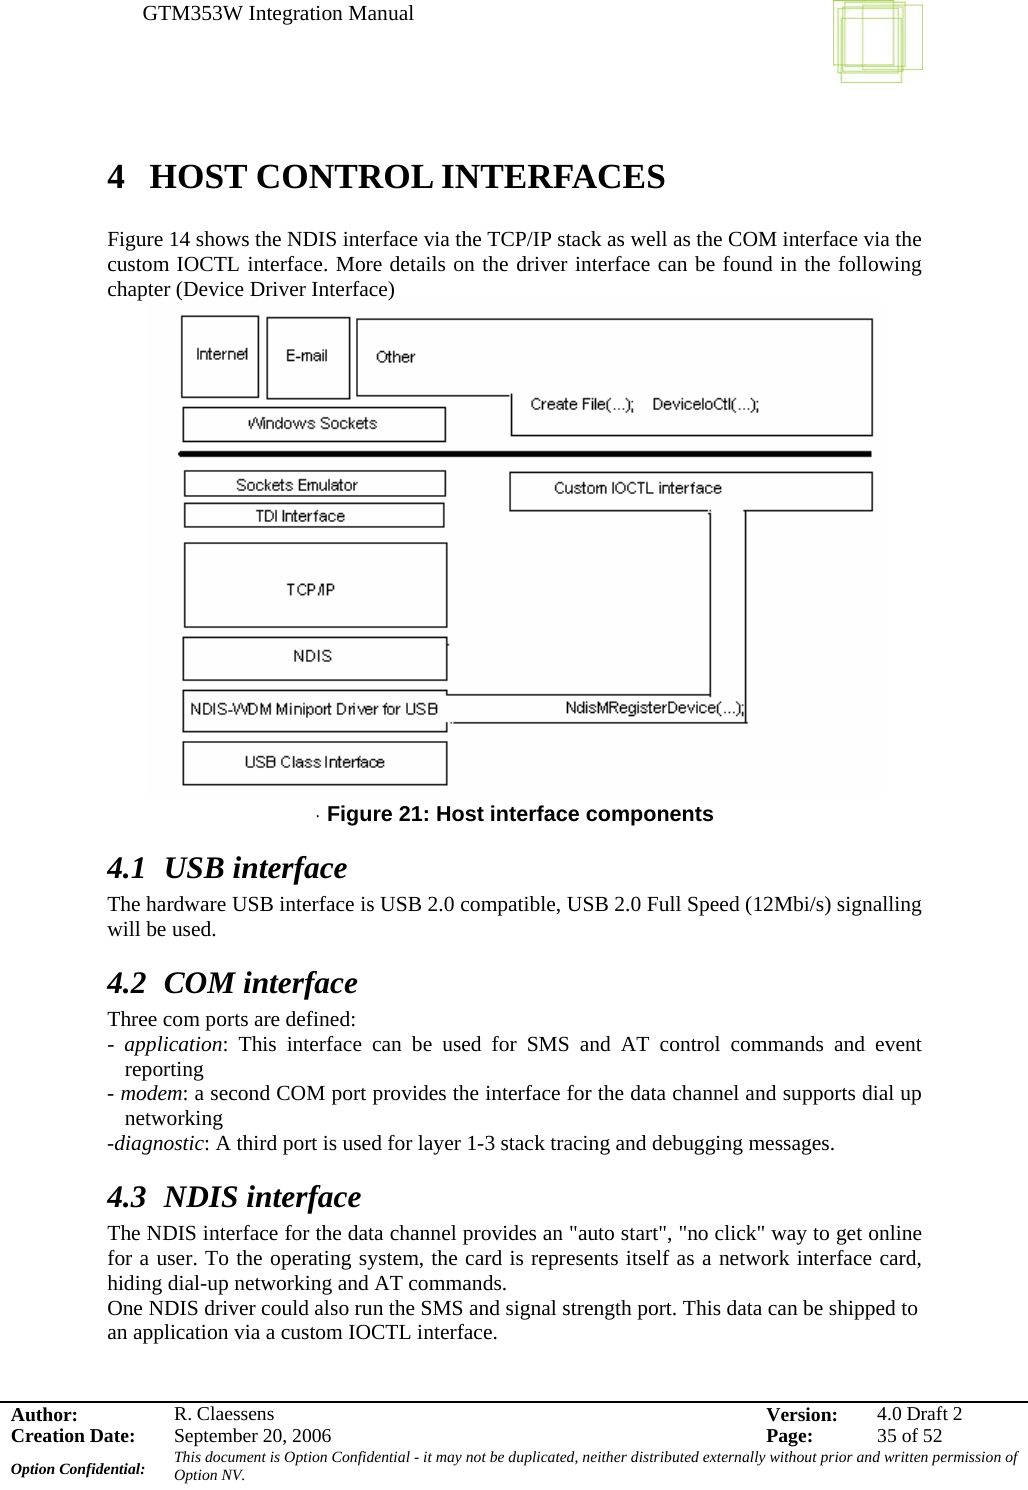 GTM353W Integration Manual      Author: R. Claessens  Version:  4.0 Draft 2Creation Date:  September 20, 2006  Page:  35 of 52 Option Confidential:  This document is Option Confidential - it may not be duplicated, neither distributed externally without prior and written permission of Option NV.    4 HOST CONTROL INTERFACES  Figure 14 shows the NDIS interface via the TCP/IP stack as well as the COM interface via the custom IOCTL interface. More details on the driver interface can be found in the following chapter (Device Driver Interface)  · Figure 21: Host interface components 4.1 USB interface The hardware USB interface is USB 2.0 compatible, USB 2.0 Full Speed (12Mbi/s) signalling will be used. 4.2 COM interface Three com ports are defined: -  application: This interface can be used for SMS and AT control commands and event reporting - modem: a second COM port provides the interface for the data channel and supports dial up networking -diagnostic: A third port is used for layer 1-3 stack tracing and debugging messages. 4.3 NDIS interface The NDIS interface for the data channel provides an &quot;auto start&quot;, &quot;no click&quot; way to get online for a user. To the operating system, the card is represents itself as a network interface card, hiding dial-up networking and AT commands. One NDIS driver could also run the SMS and signal strength port. This data can be shipped to an application via a custom IOCTL interface. 